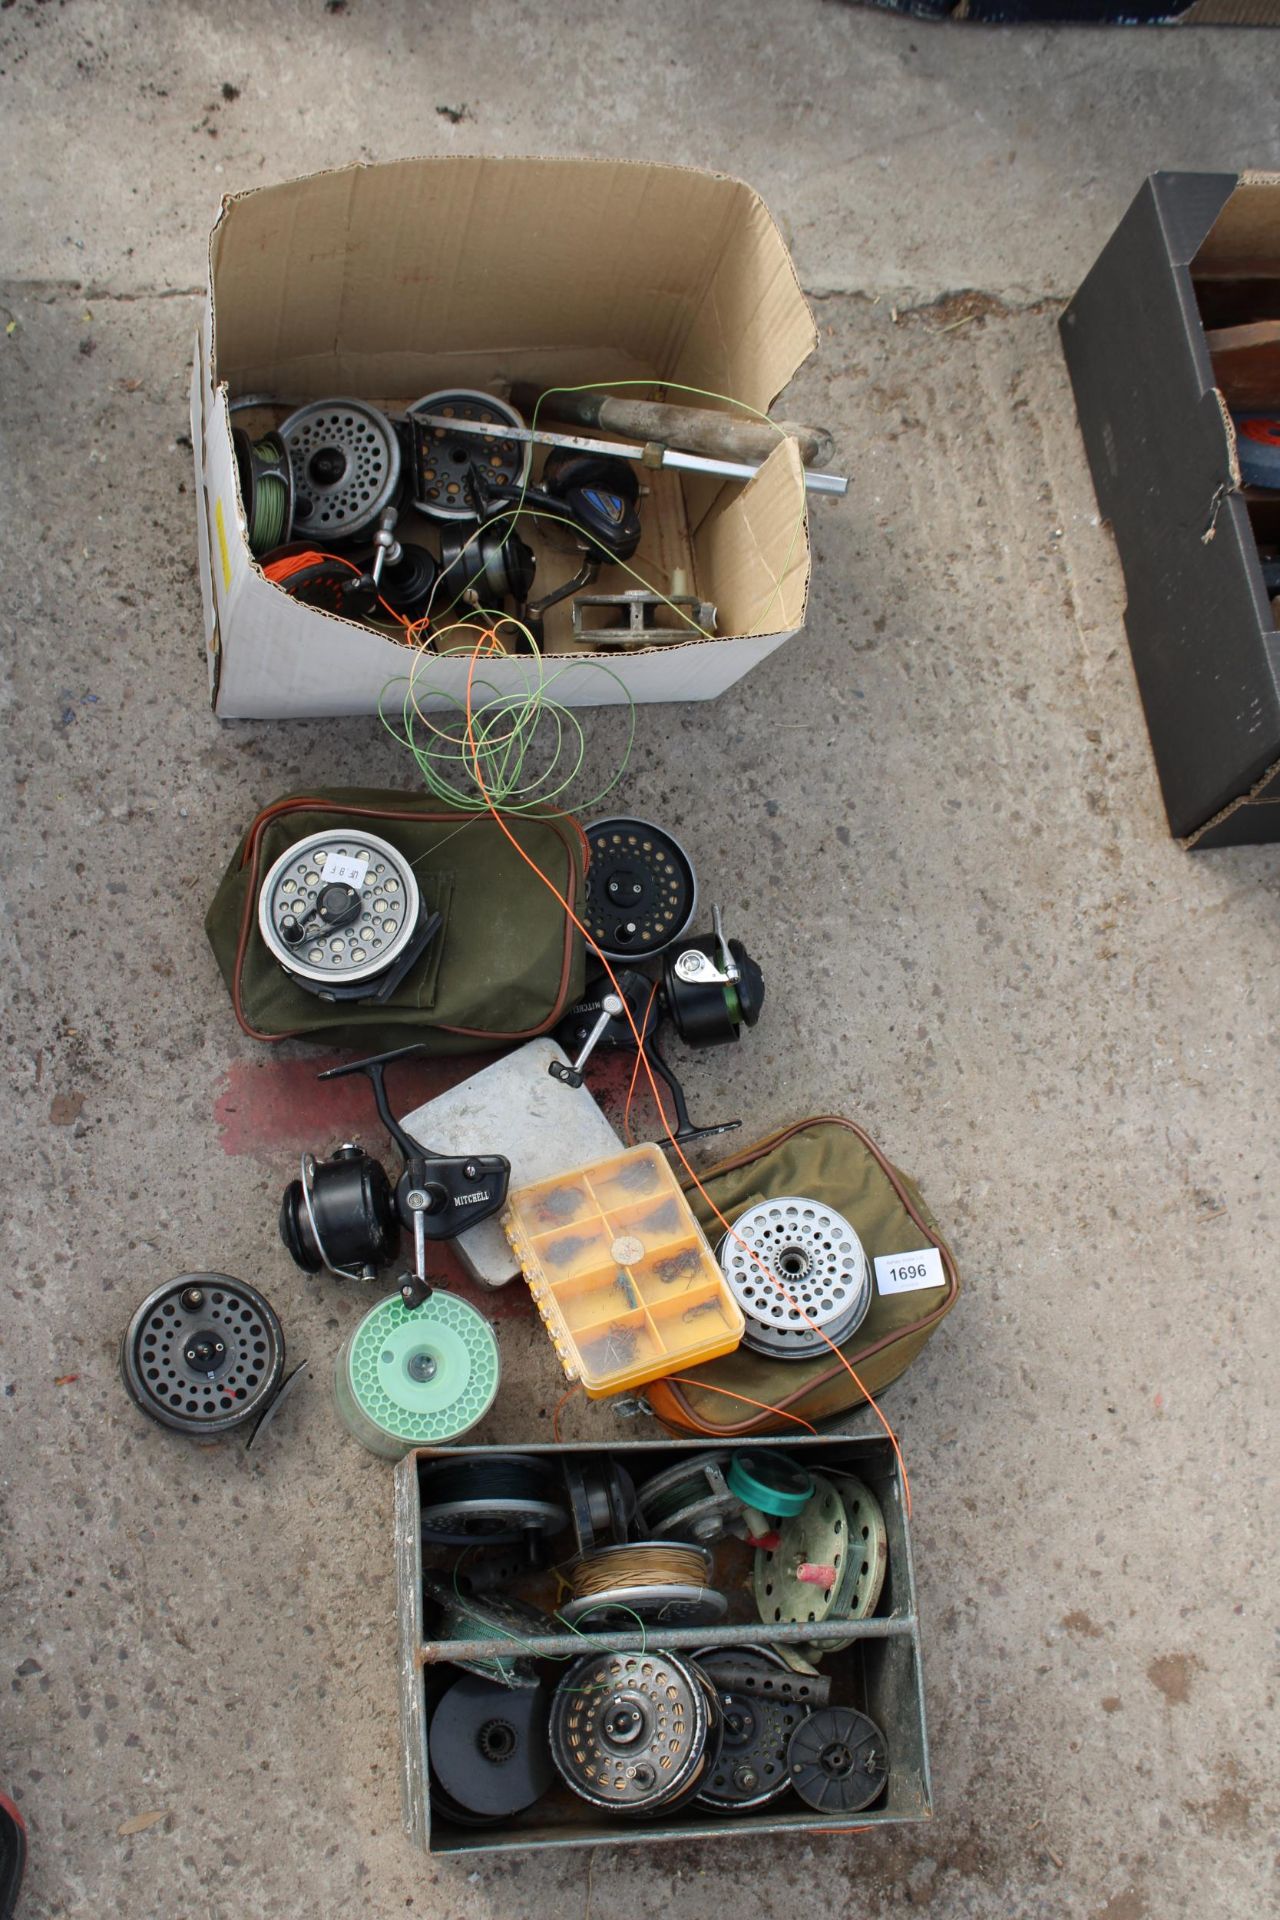 A LARGE ASSORTMENT OF VINTAGE AND MODERN FISHING REELS